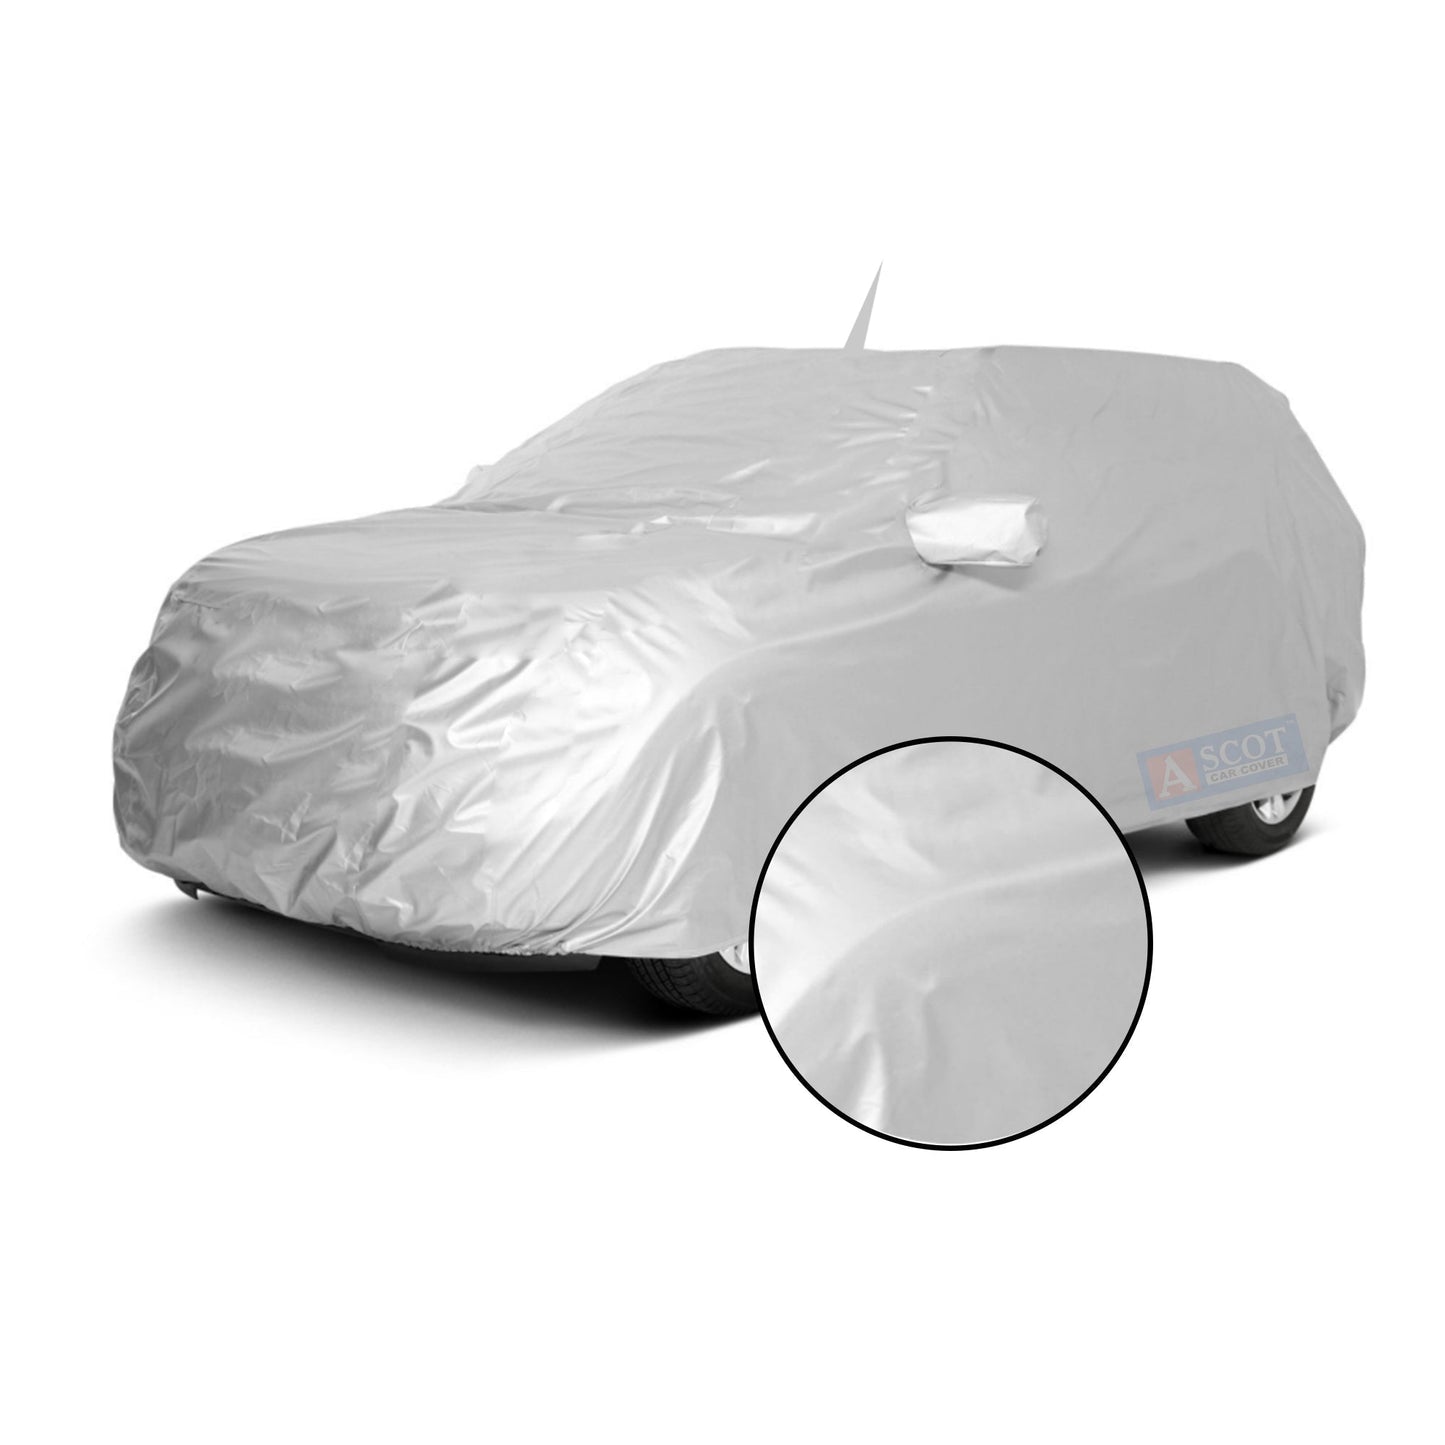 Ascot Swift Car Body Cover 2011-2017 Model Dust Proof, Trippel Stitched